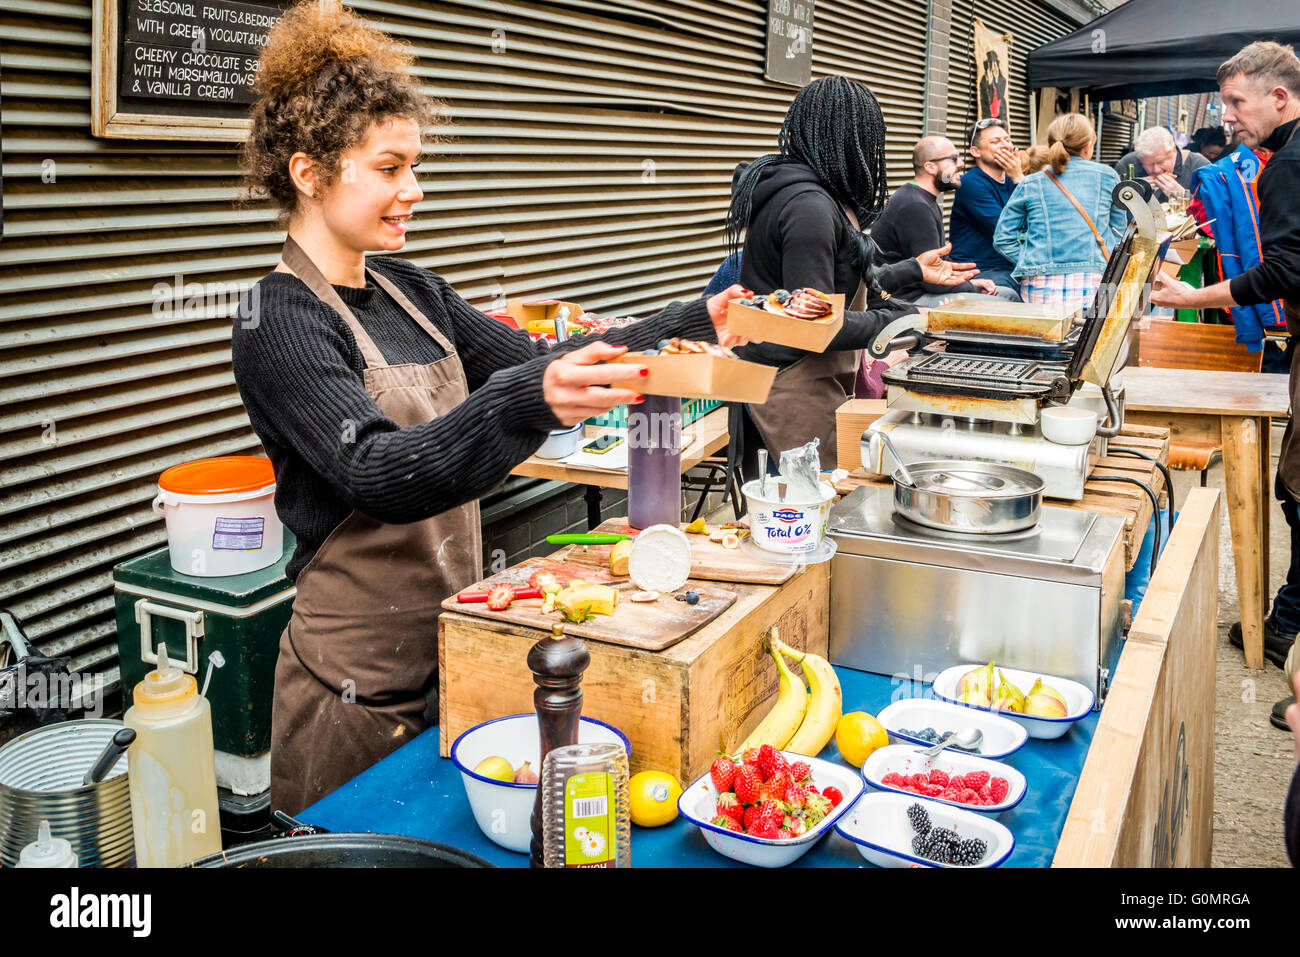 London, United Kingdom - April 30, 2016: Maltby Street Market in Bermondsey (located in railway arches, SE1, Rope Walk) Stock Photo